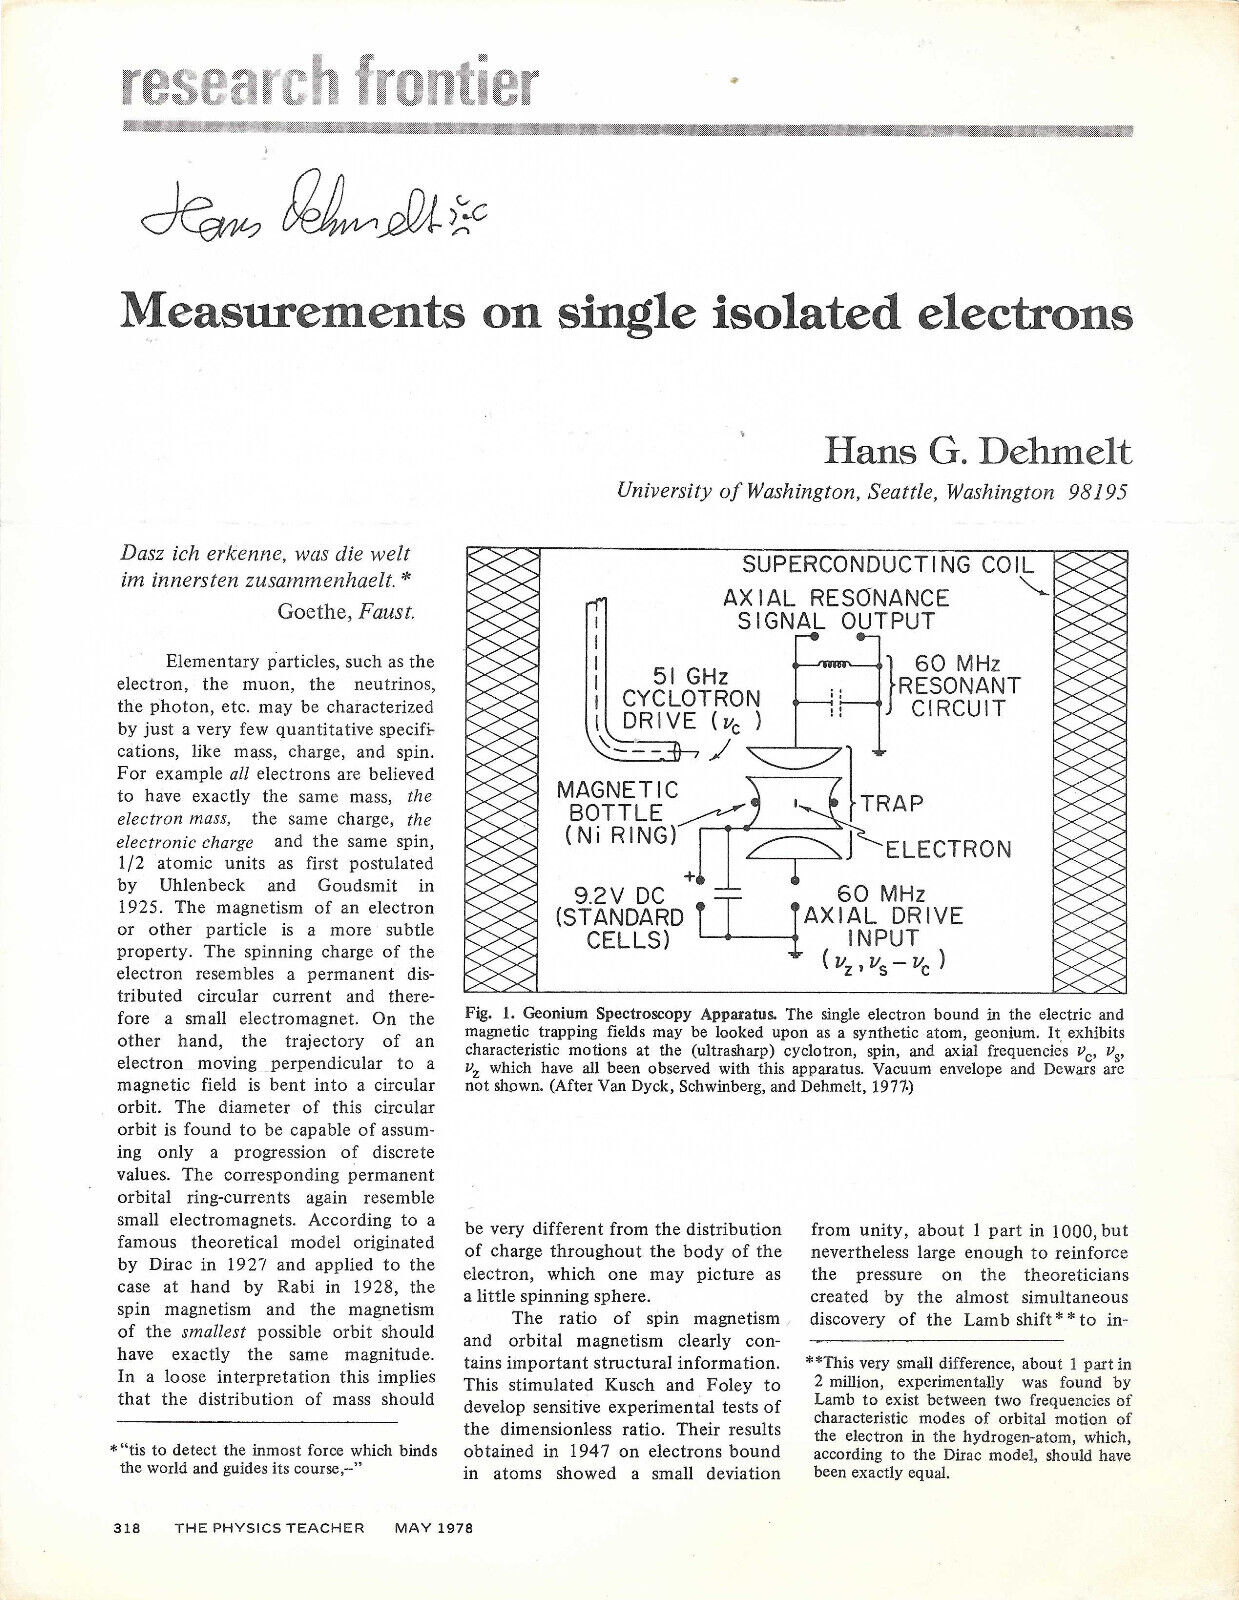 Hans Dehmelt Autographed Article from The Physics Teacher, May 1978